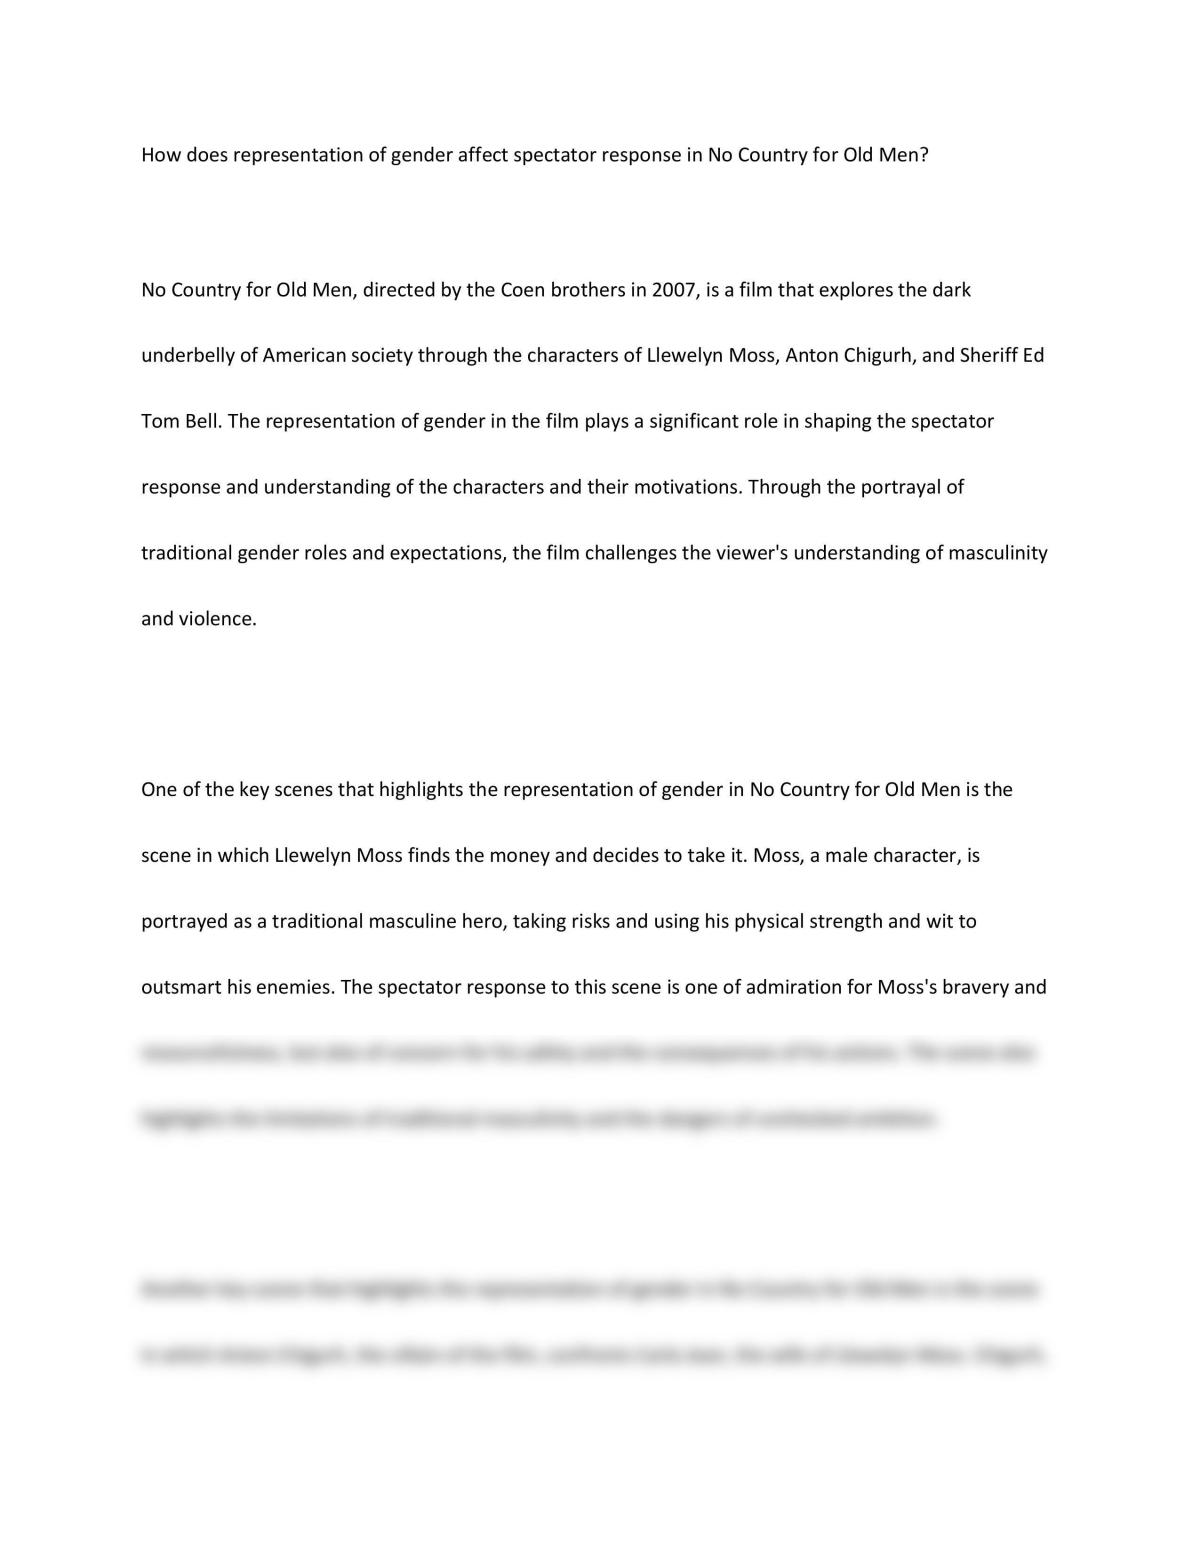 Essay on gender and spectatorship in No Country for Old Men - Page 1